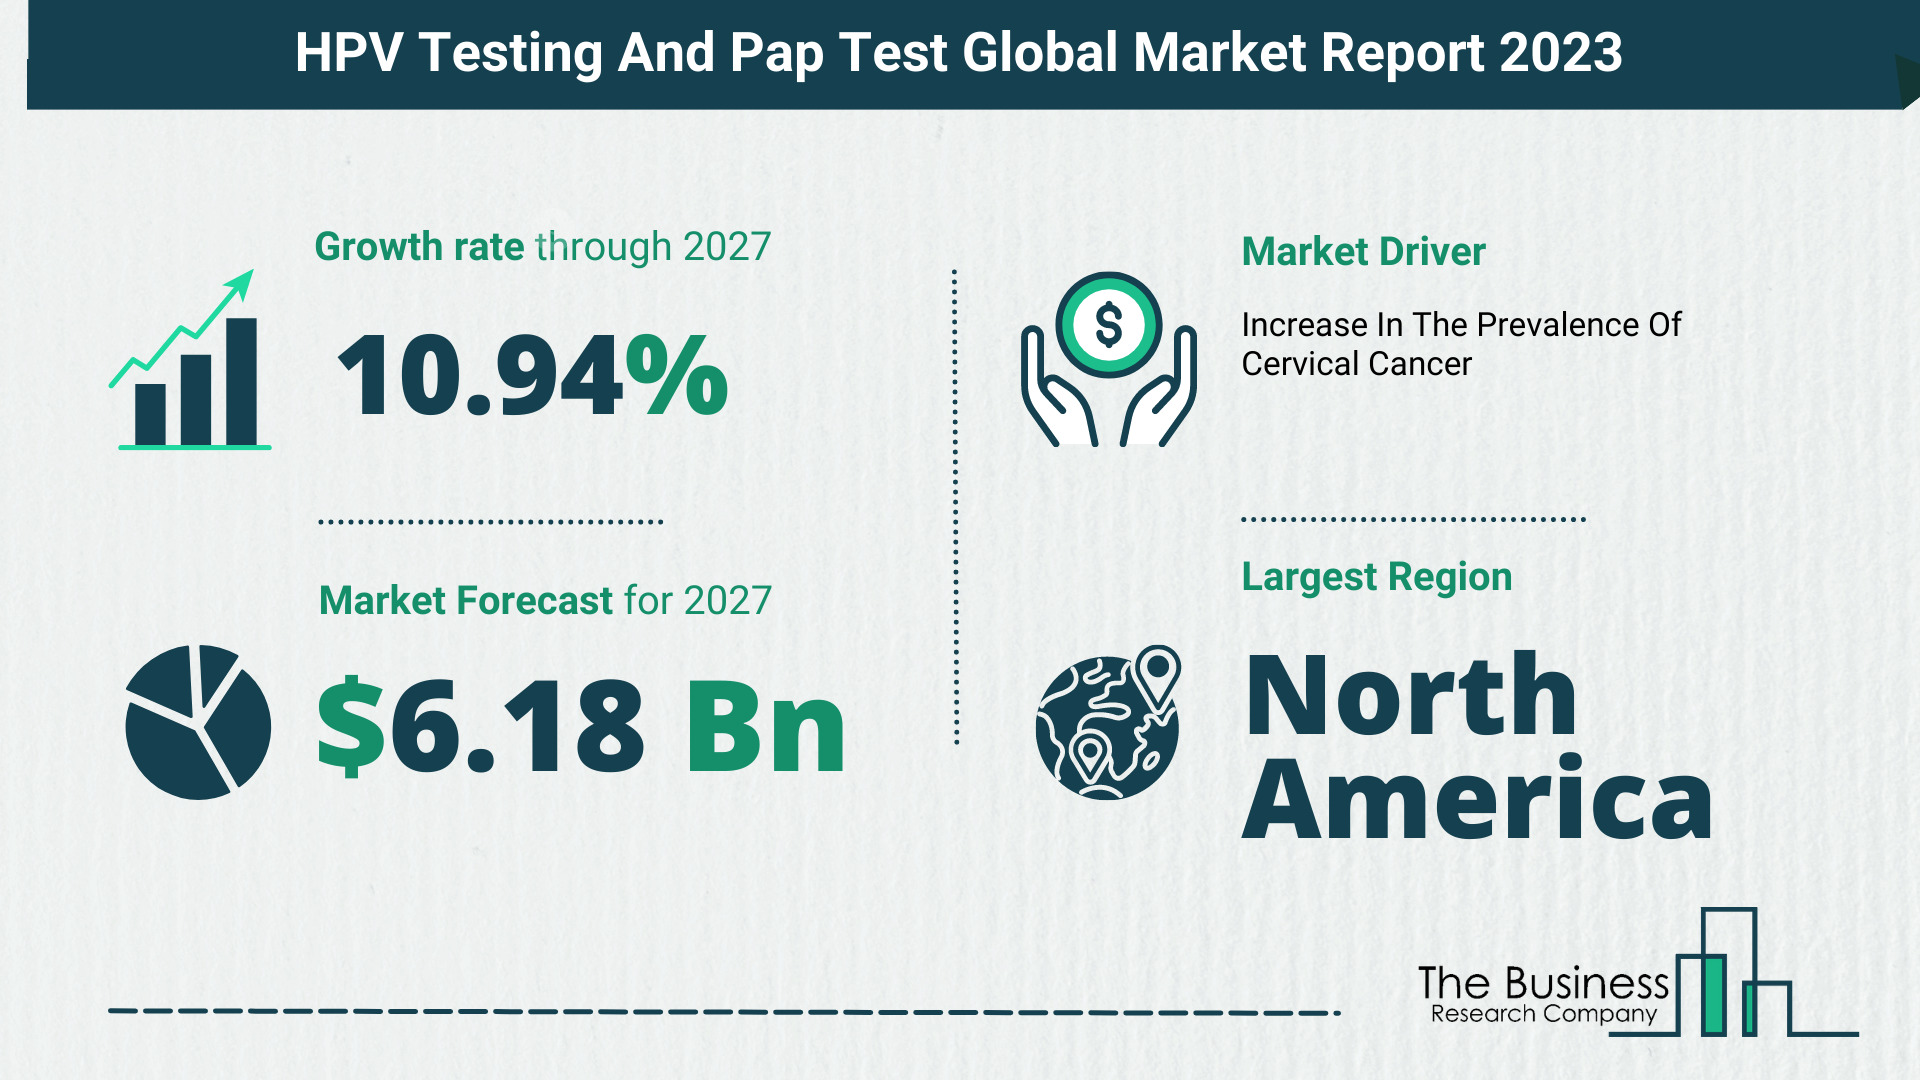 Global HPV Testing And Pap Test Market